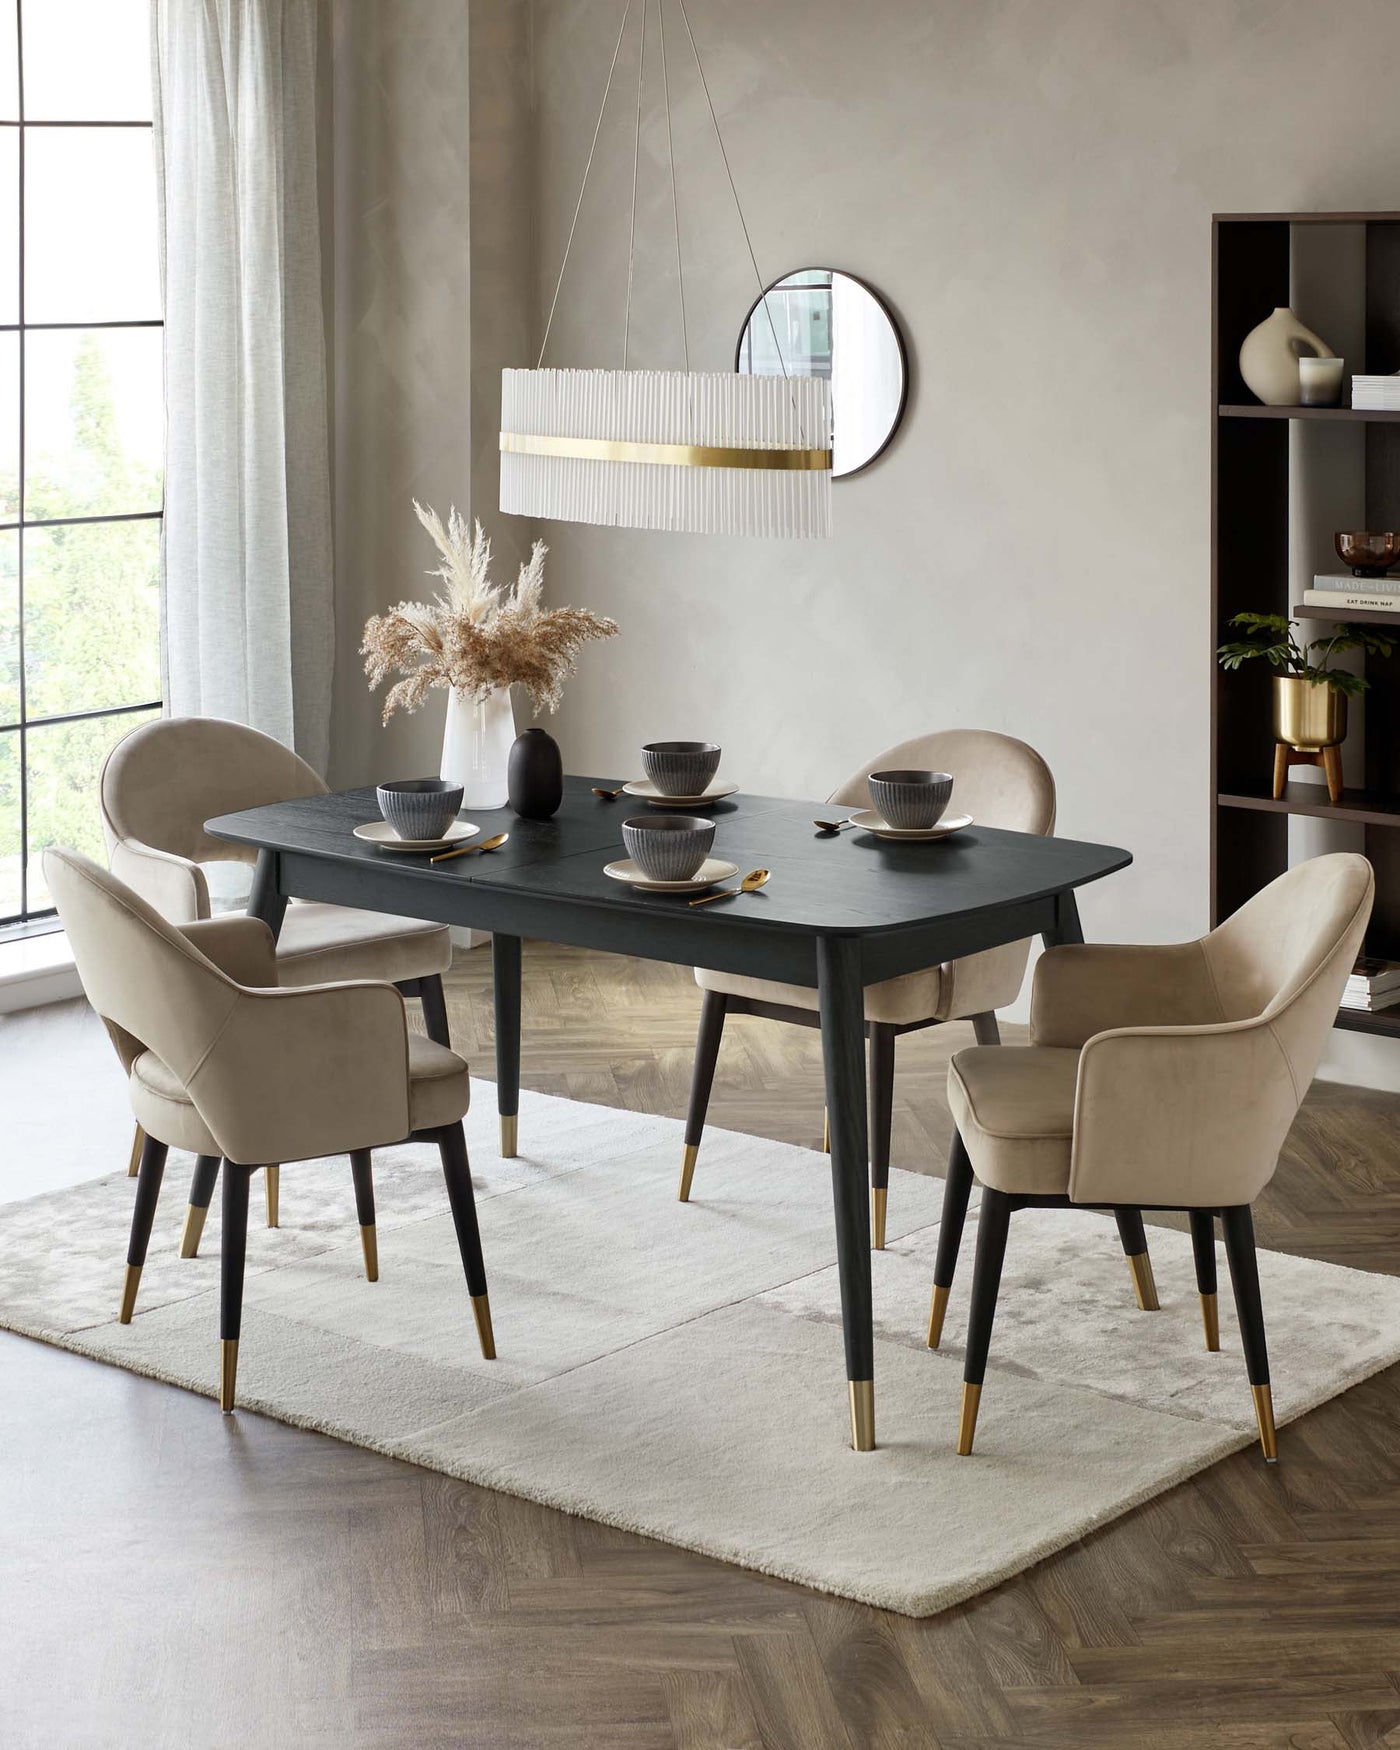 Elegant dining room set featuring a rectangular dark wood table with slender, tapered legs accented with gold tips. The table is surrounded by four upholstered chairs with a velvety beige fabric, showcasing curved backrests and legs with matching gold accents on their tips. The setup is centred on a textured off-white area rug, which contrasts with the wooden floor, providing a cosy and sophisticated atmosphere.